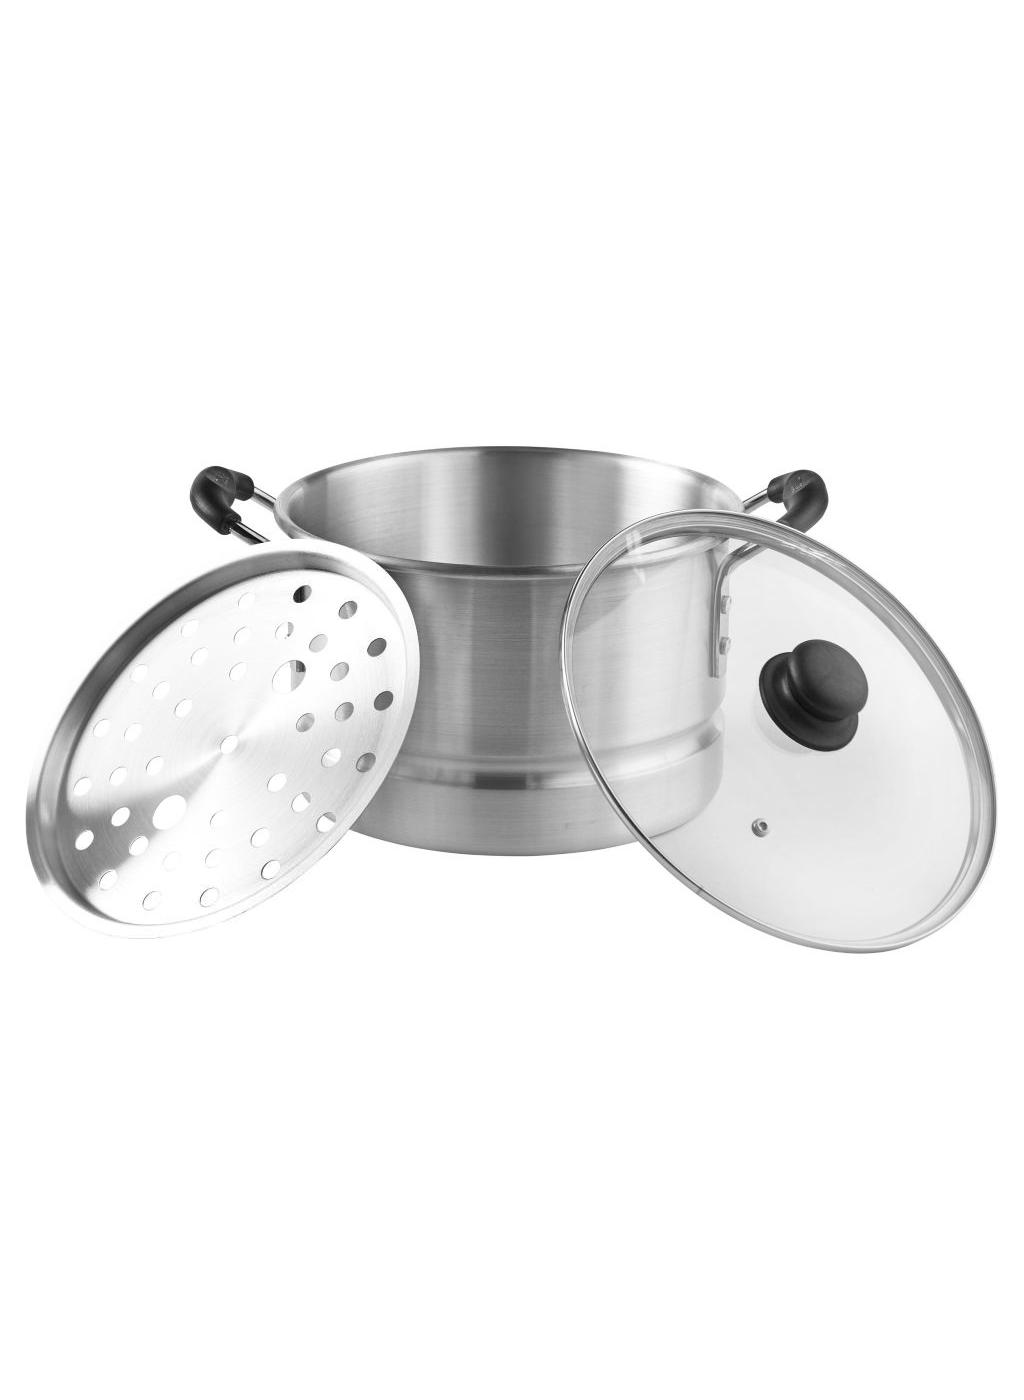 Cocinaware Blue Tamale Steamer with Glass Lid - Shop Stock Pots & Sauce  Pans at H-E-B